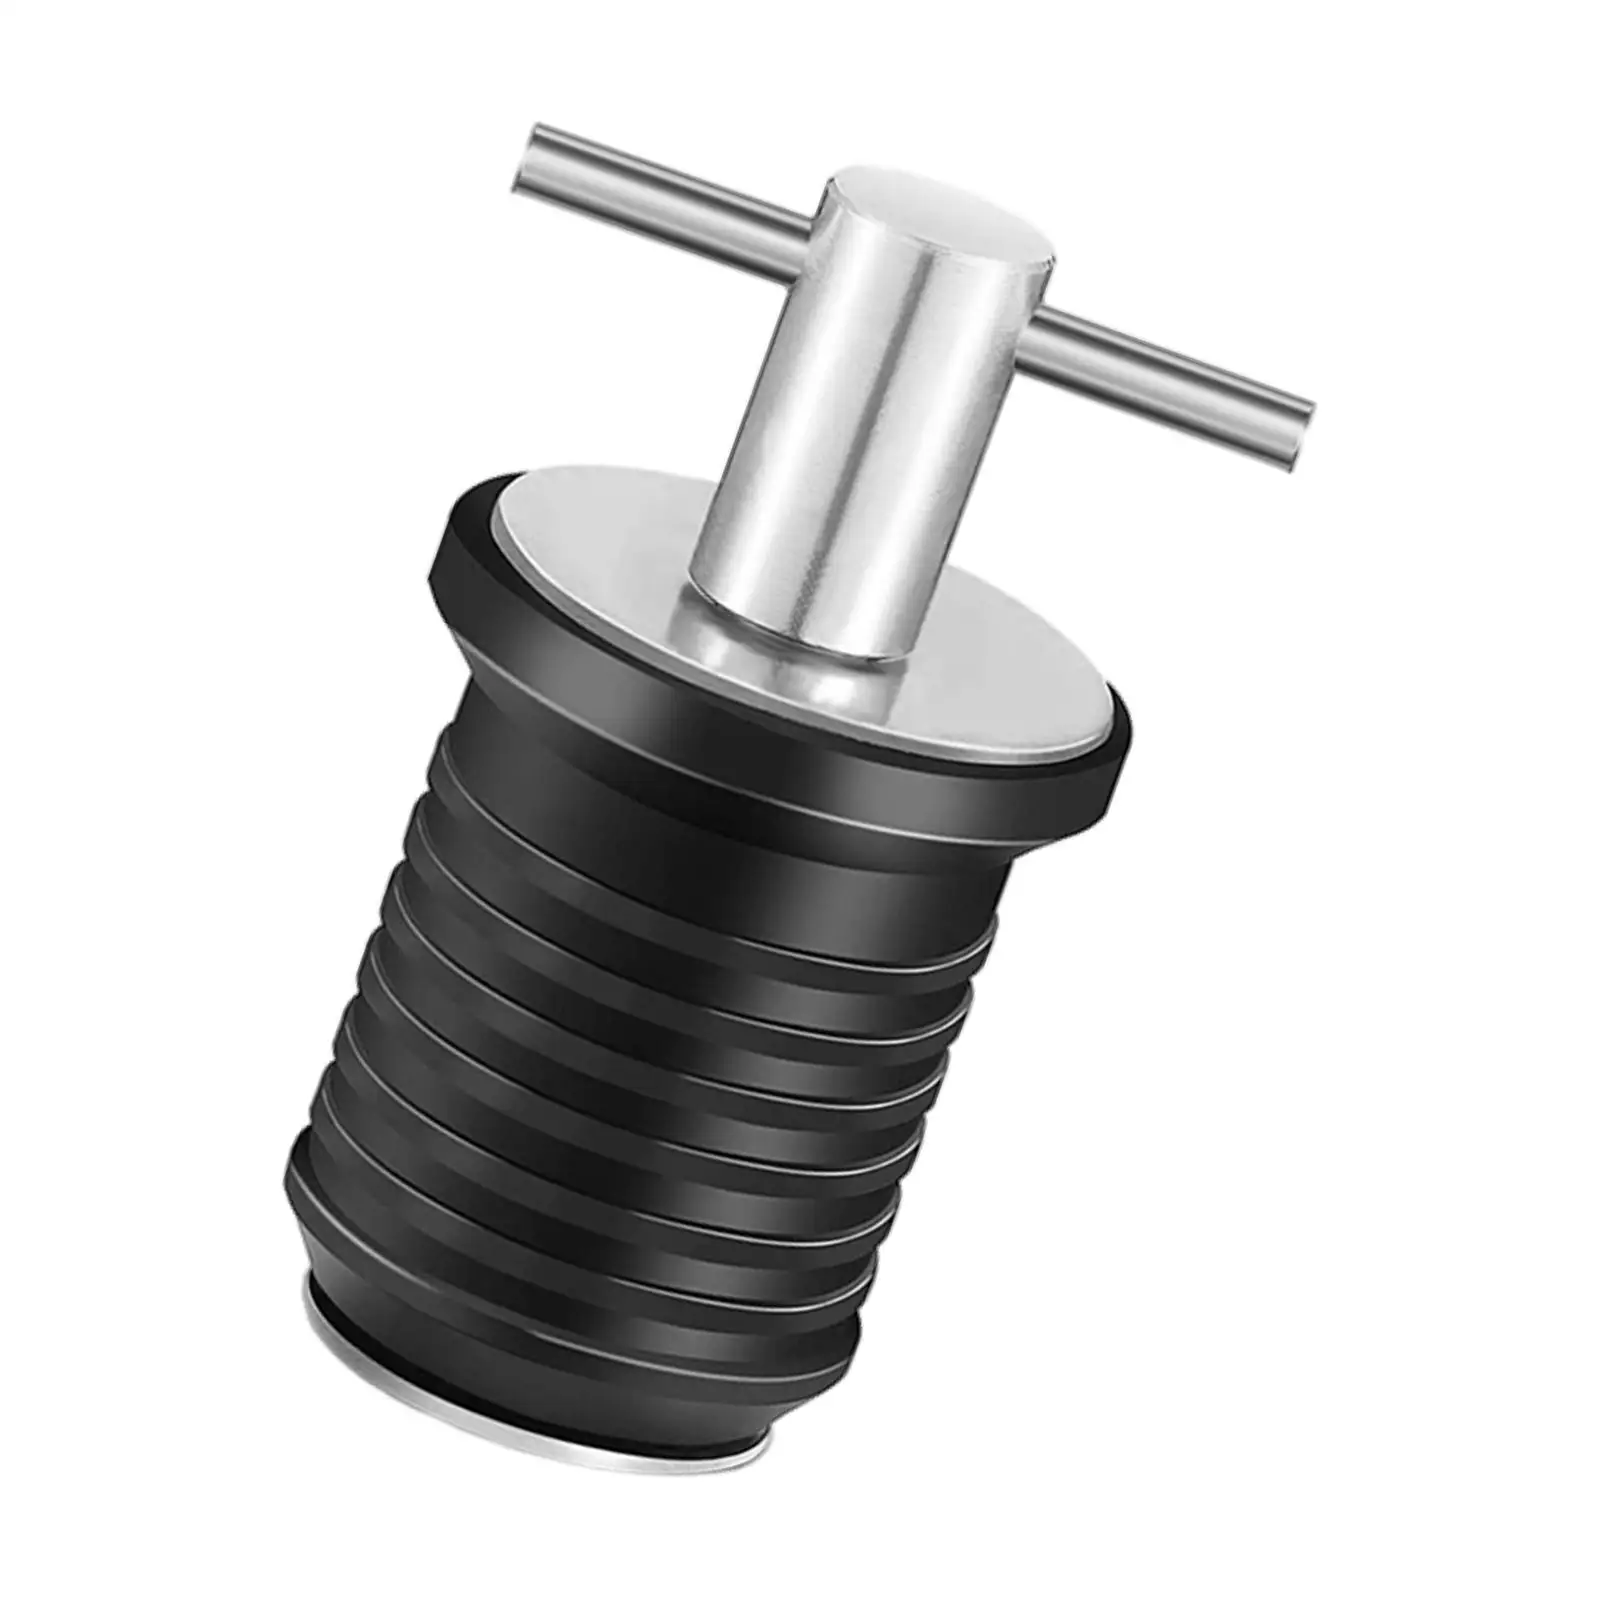 Boat Drain Plug Direct Replaces High Performance Rubber Plug Easy to Operate  Spare Parts Premium , Strong and Sturdy